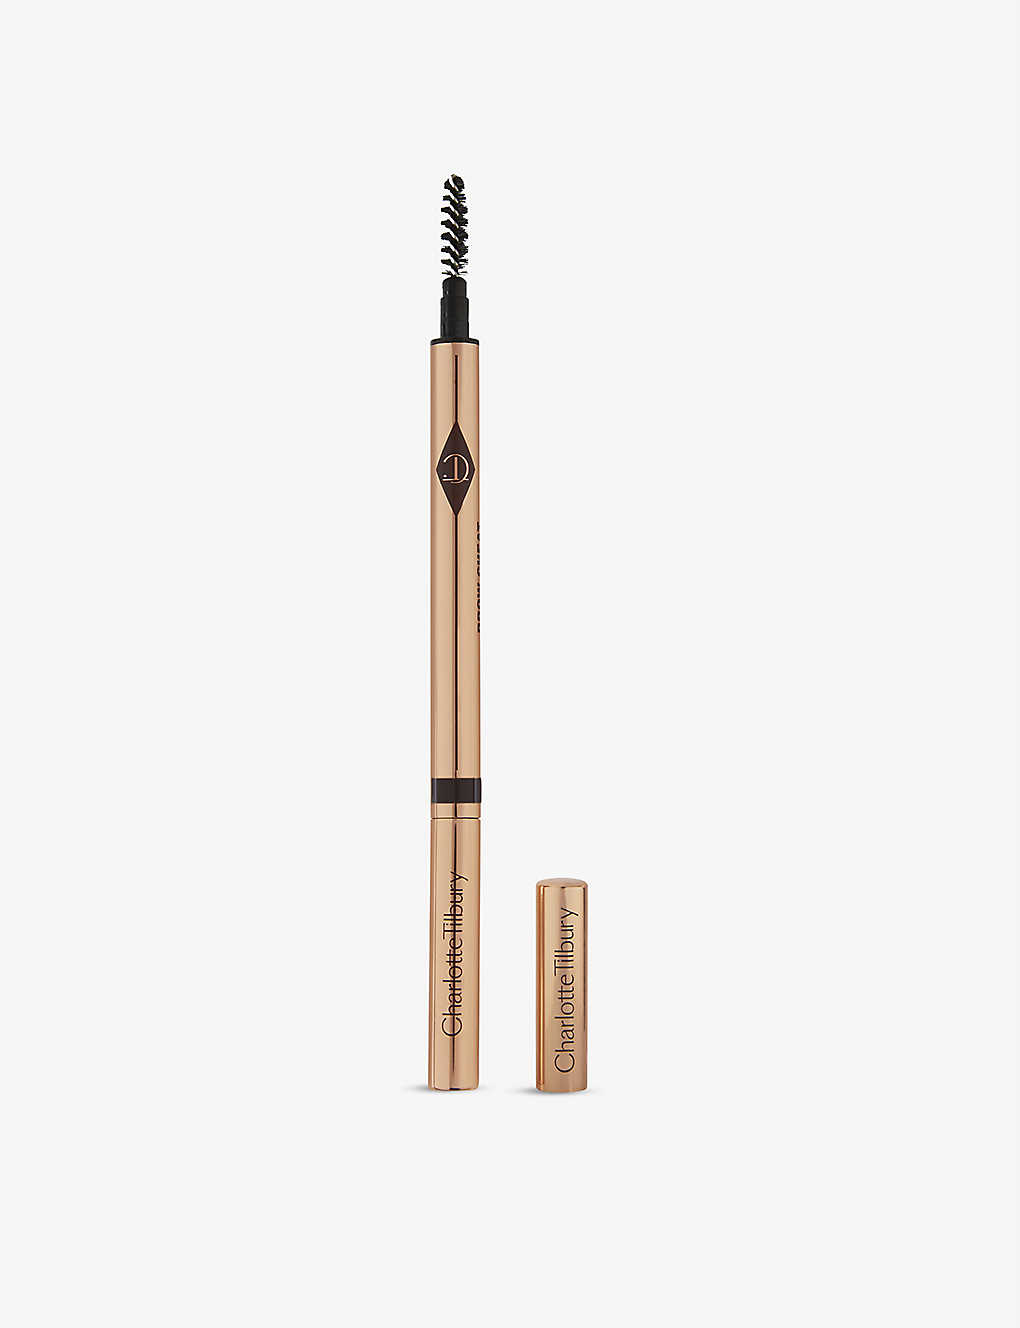 Charlotte Tilbury Brow Cheat Refillable Eyebrow Pencil 0.1g In Natural Black